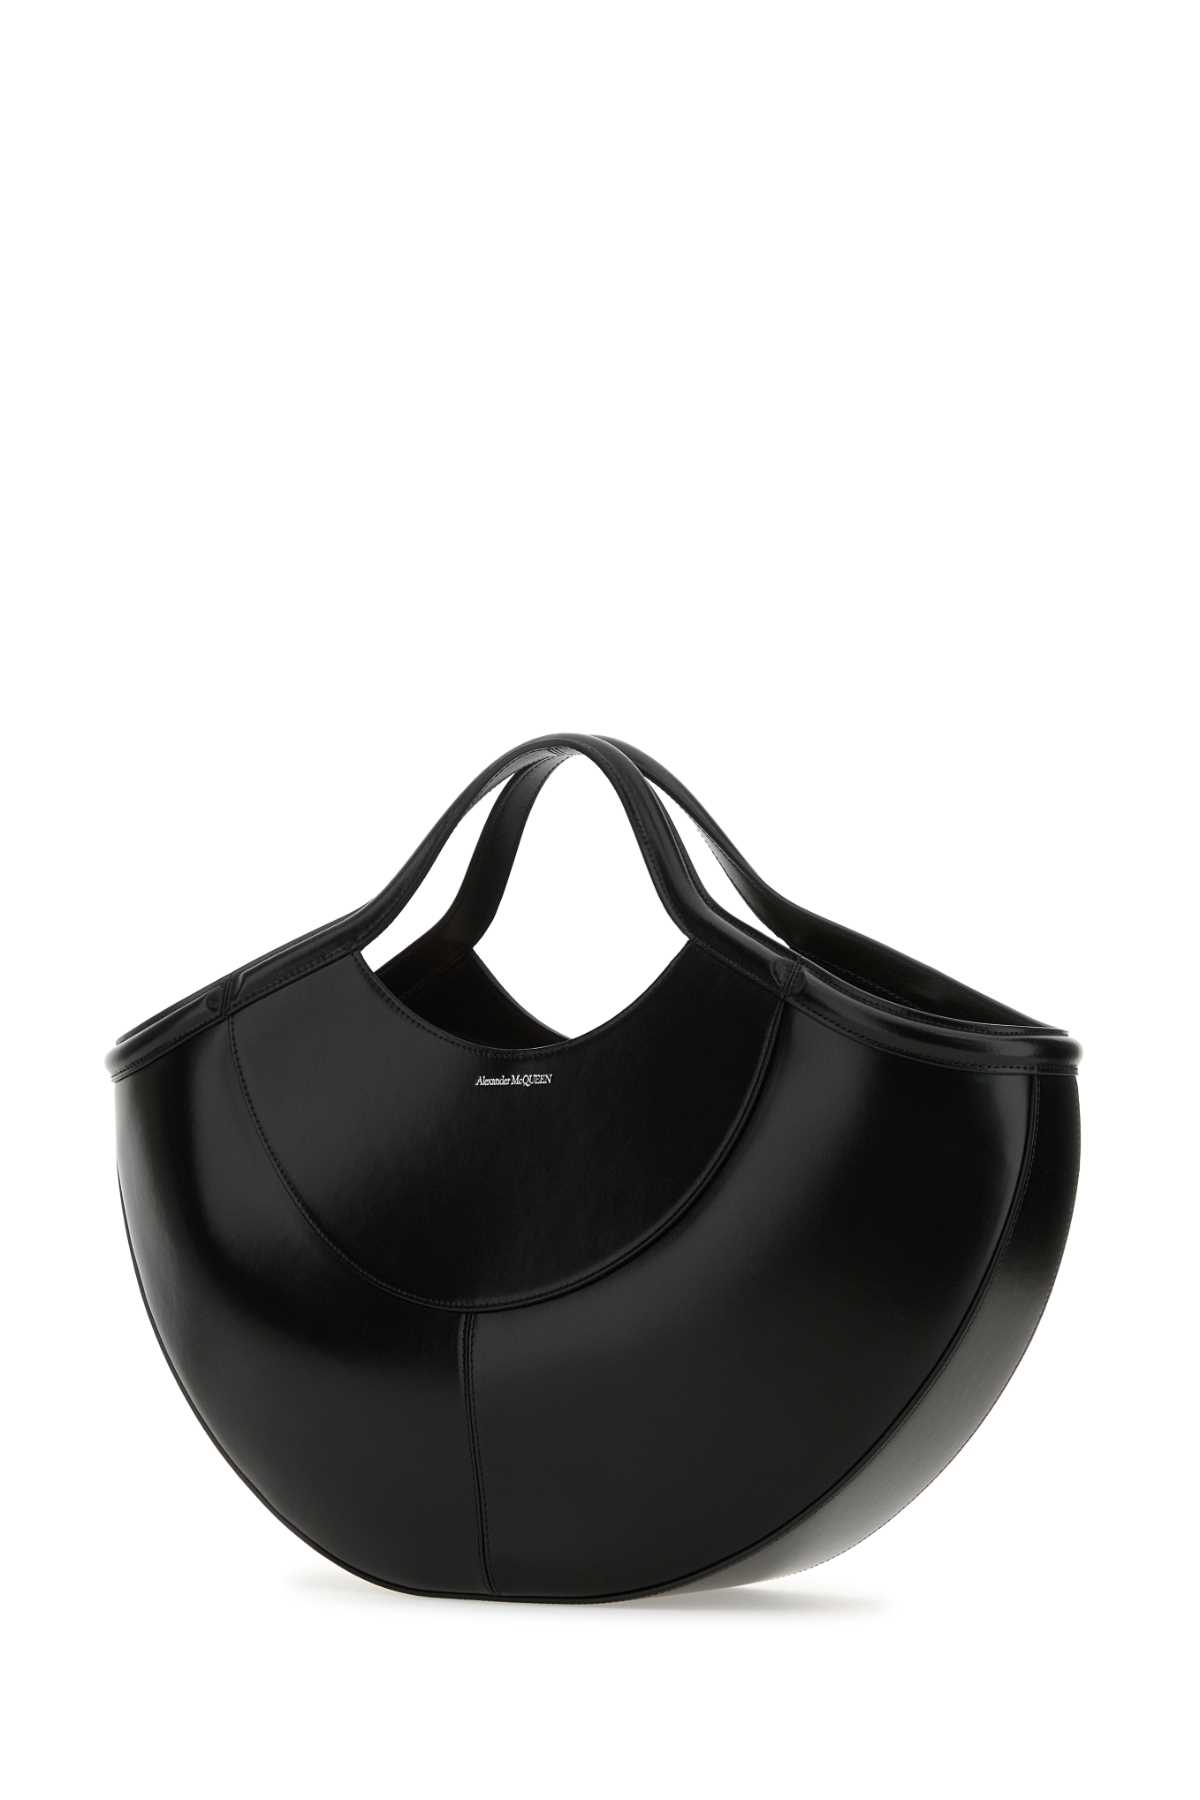 Shop Alexander Mcqueen Black Leather The Cove Shopping Bag